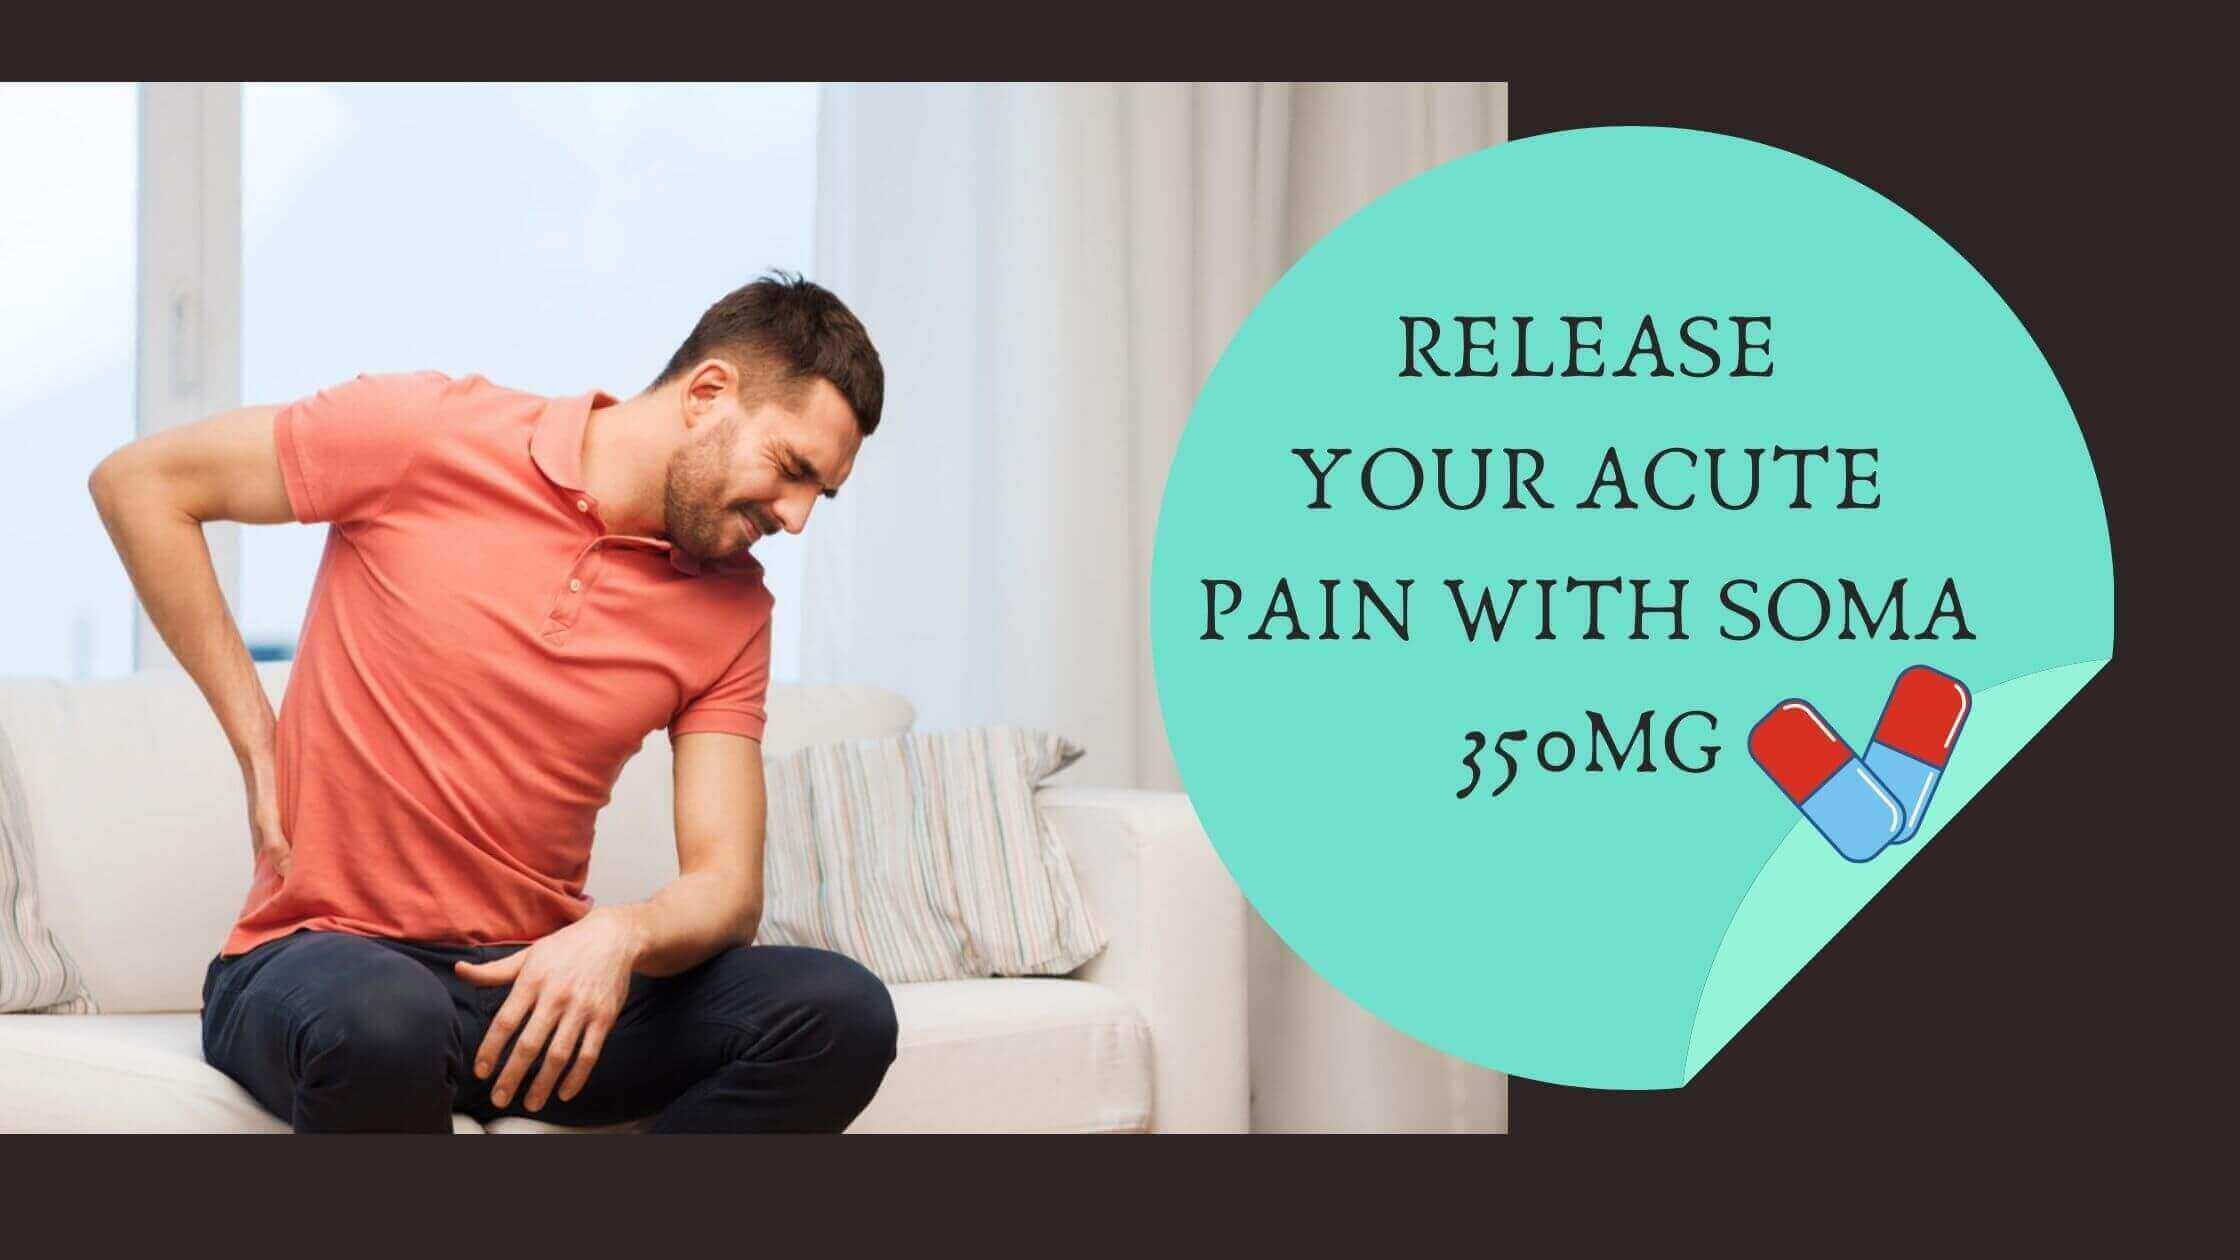 Soma 350mg - Easy And Instant Solution For Acute Pain